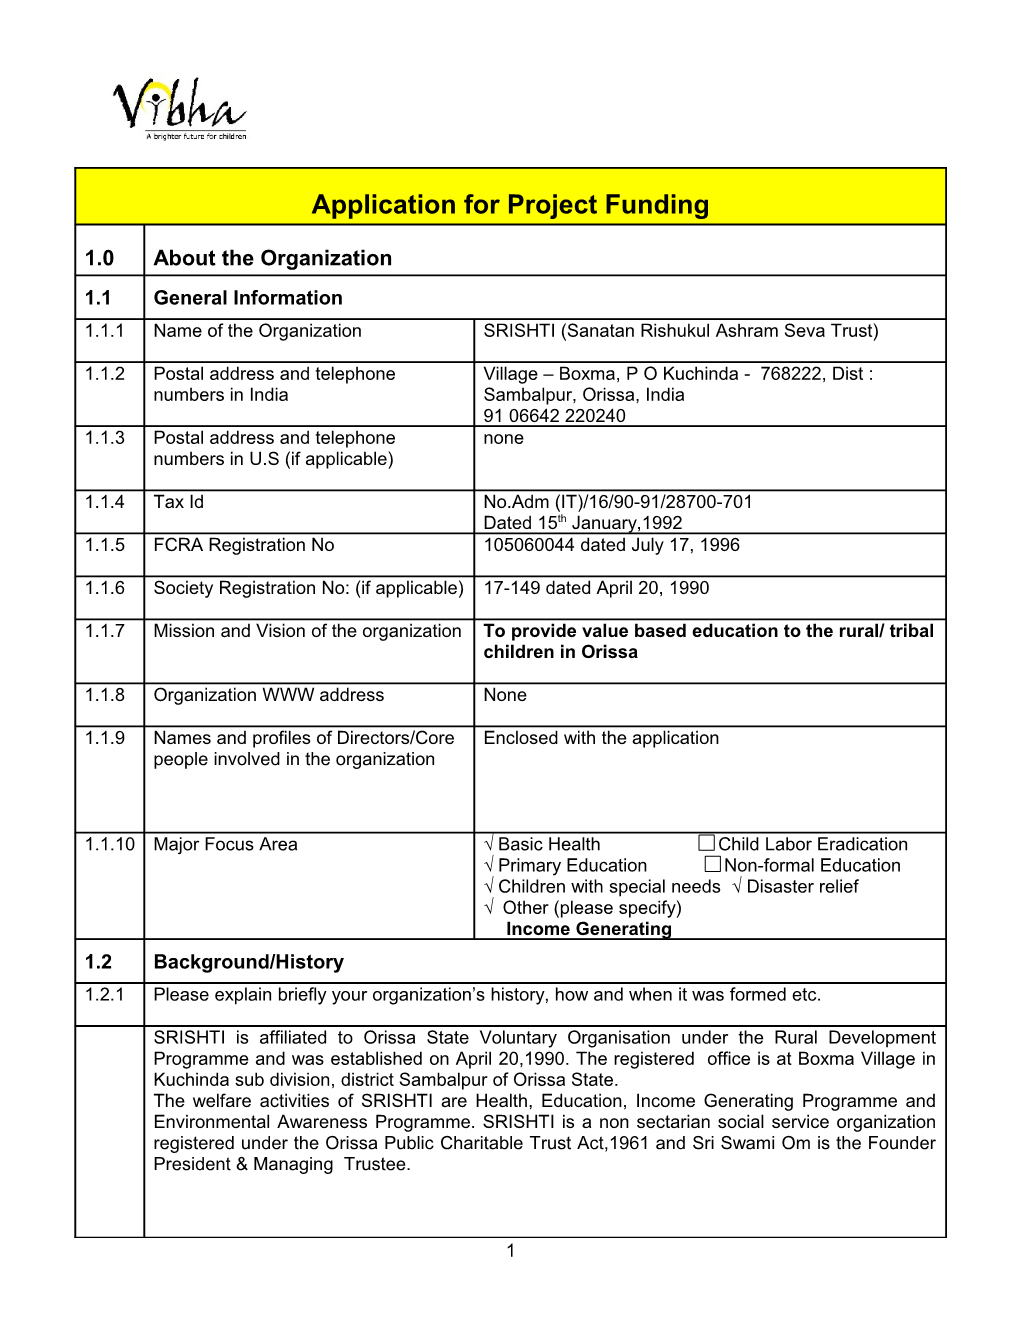 Application for Project Funding s12